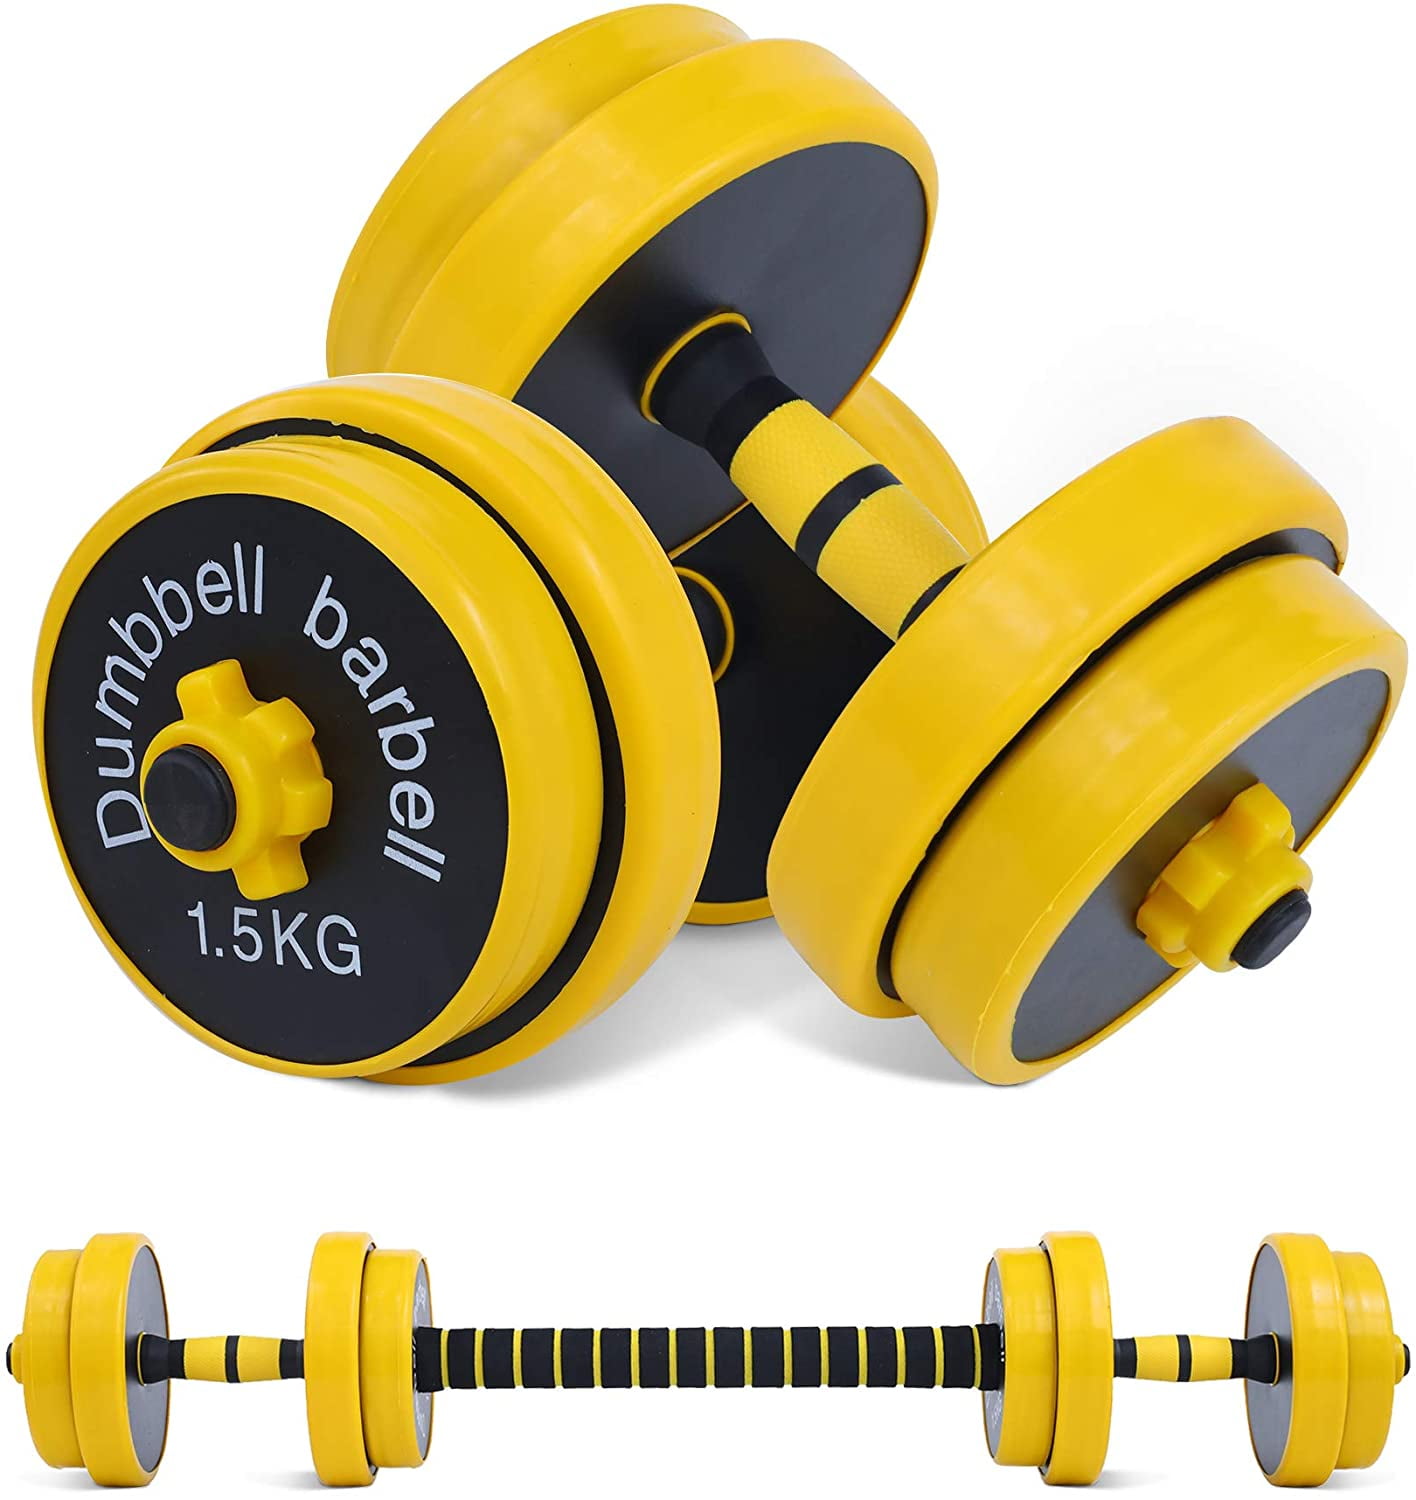 SogesHome Adjustable Dumbbells NSDCA-HSYL001-30 Pair Iron Sand Mixture Octagonal Designed Easily Convert to Barbell 61.6 Pounds Dumbbells Anti Rolling Fitness Dumbbells 